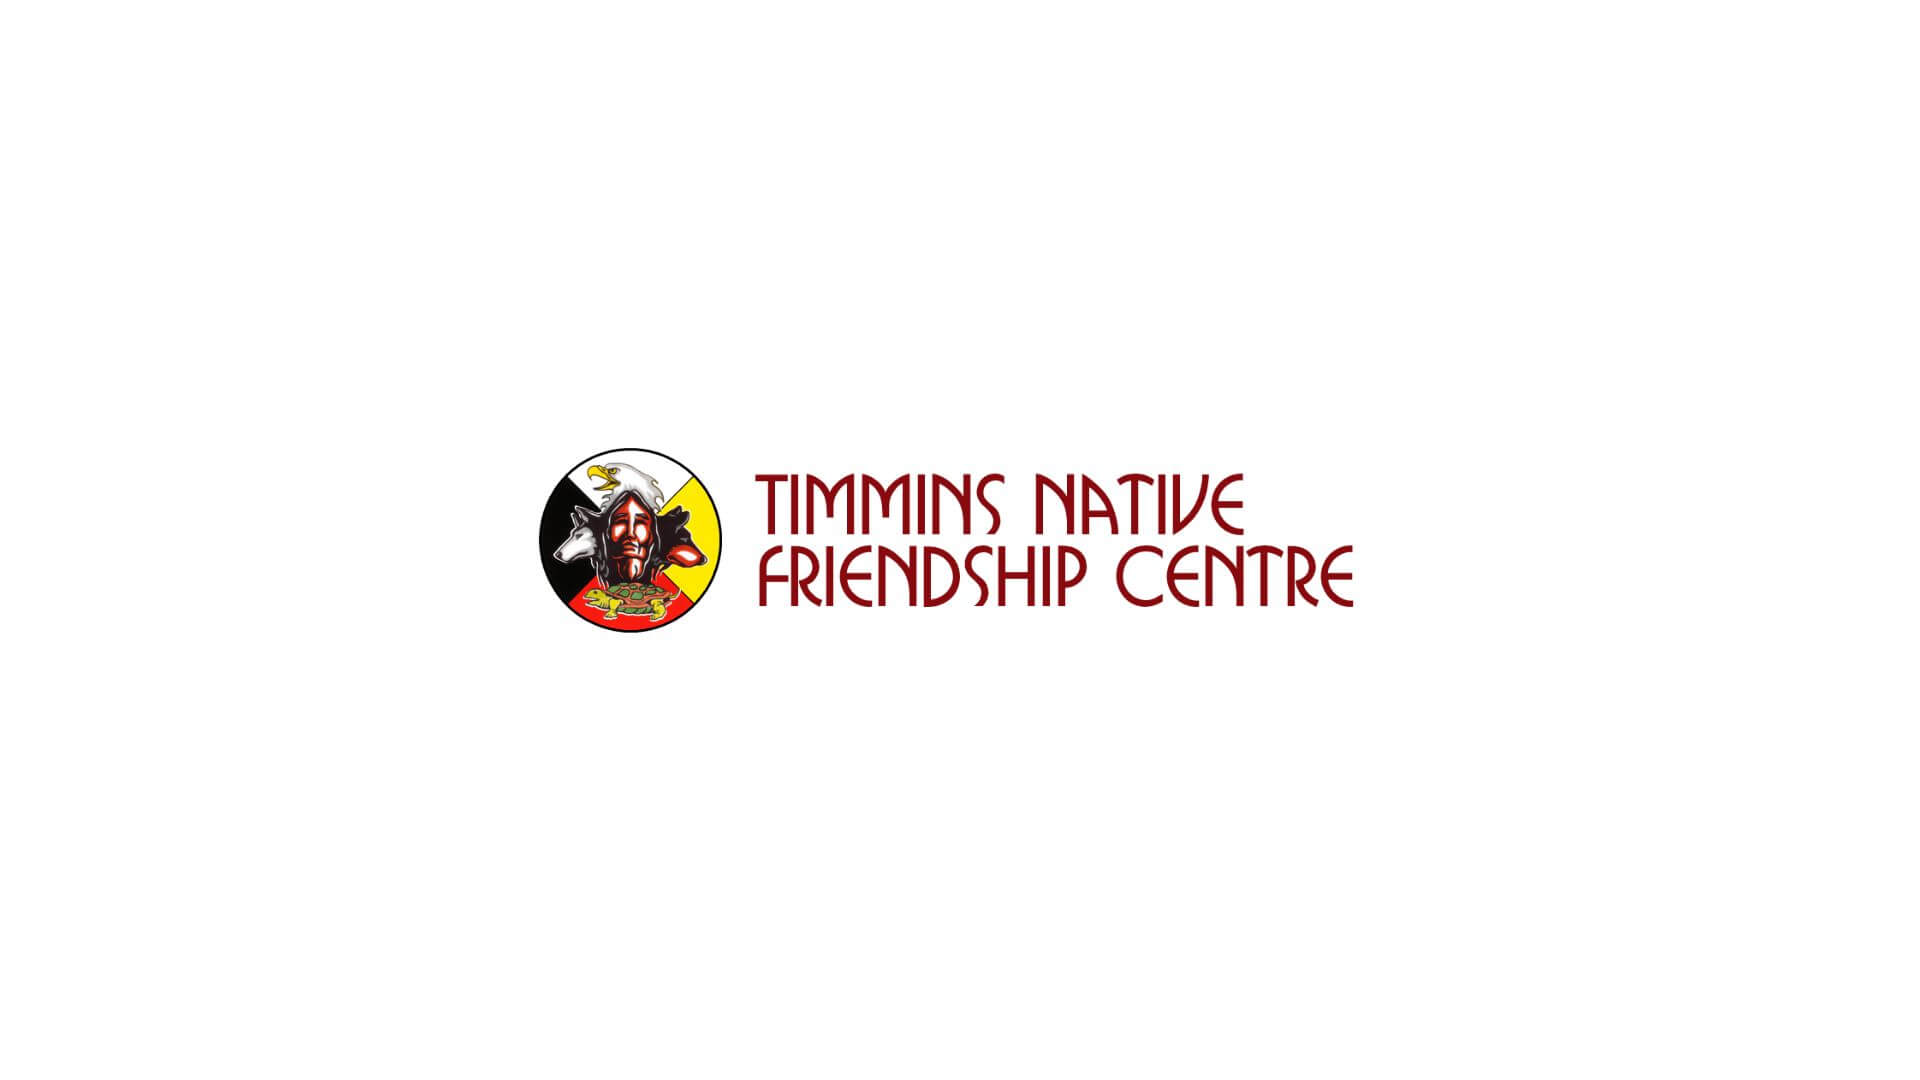 Timmins Care Logo of the Timmins Native Friendship Centre featuring Indigenous-themed artwork, recognized by the Cochrane District Social Services Administration Board. Cochrane District Social Services Administration Board